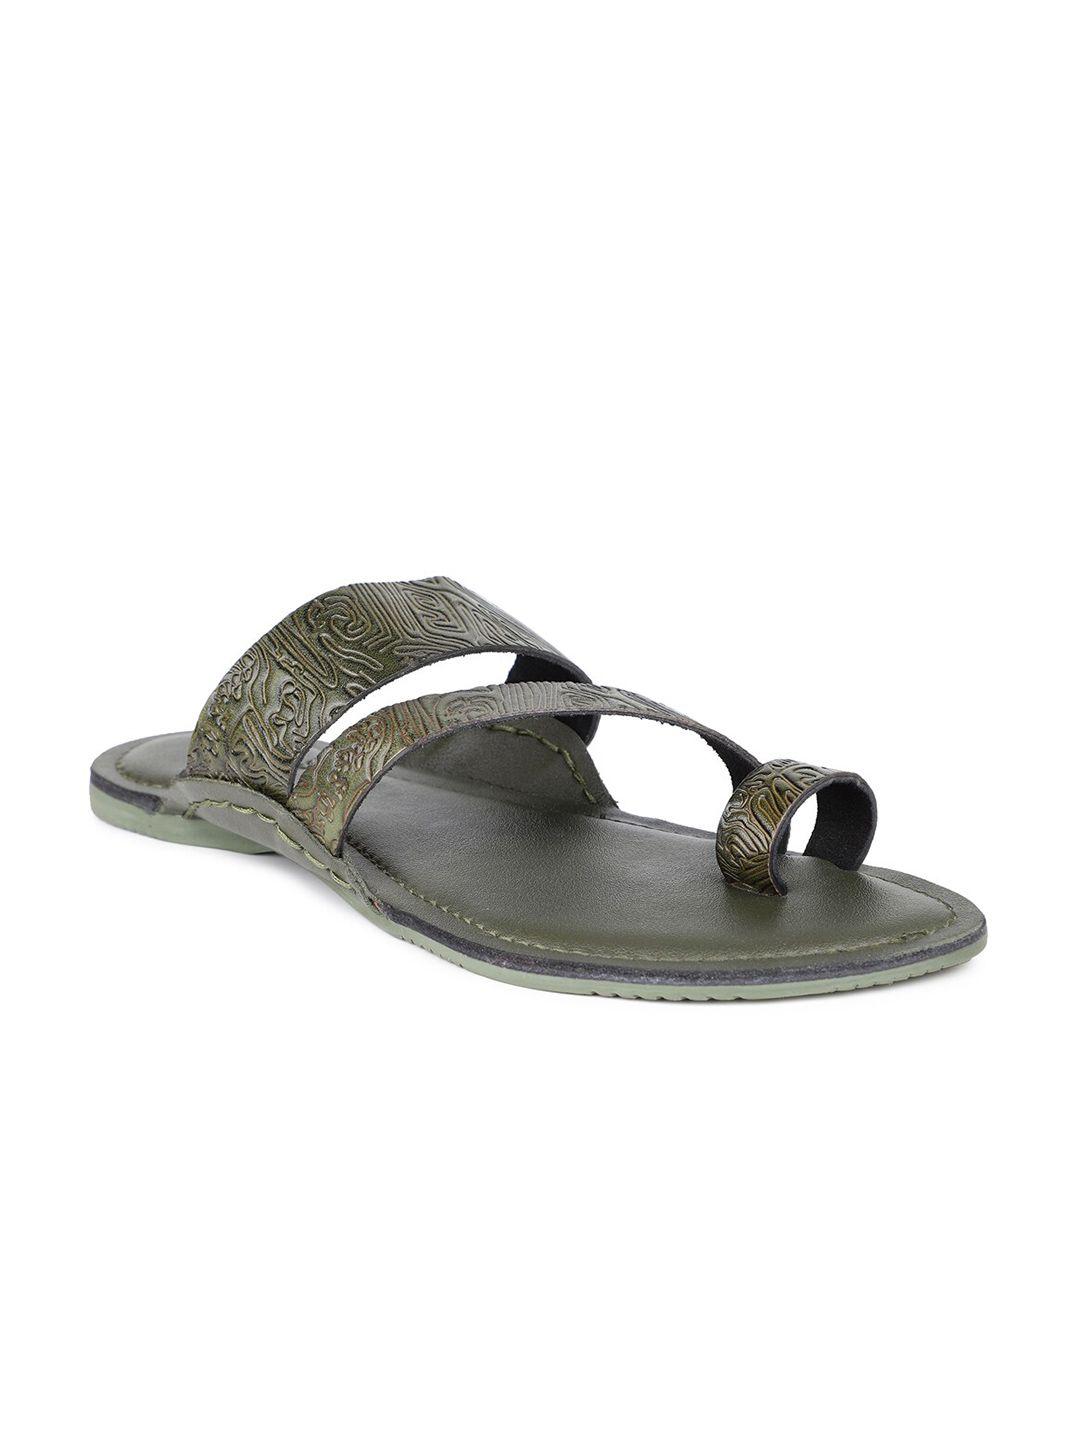 privo men green leather comfort casual thong sandals